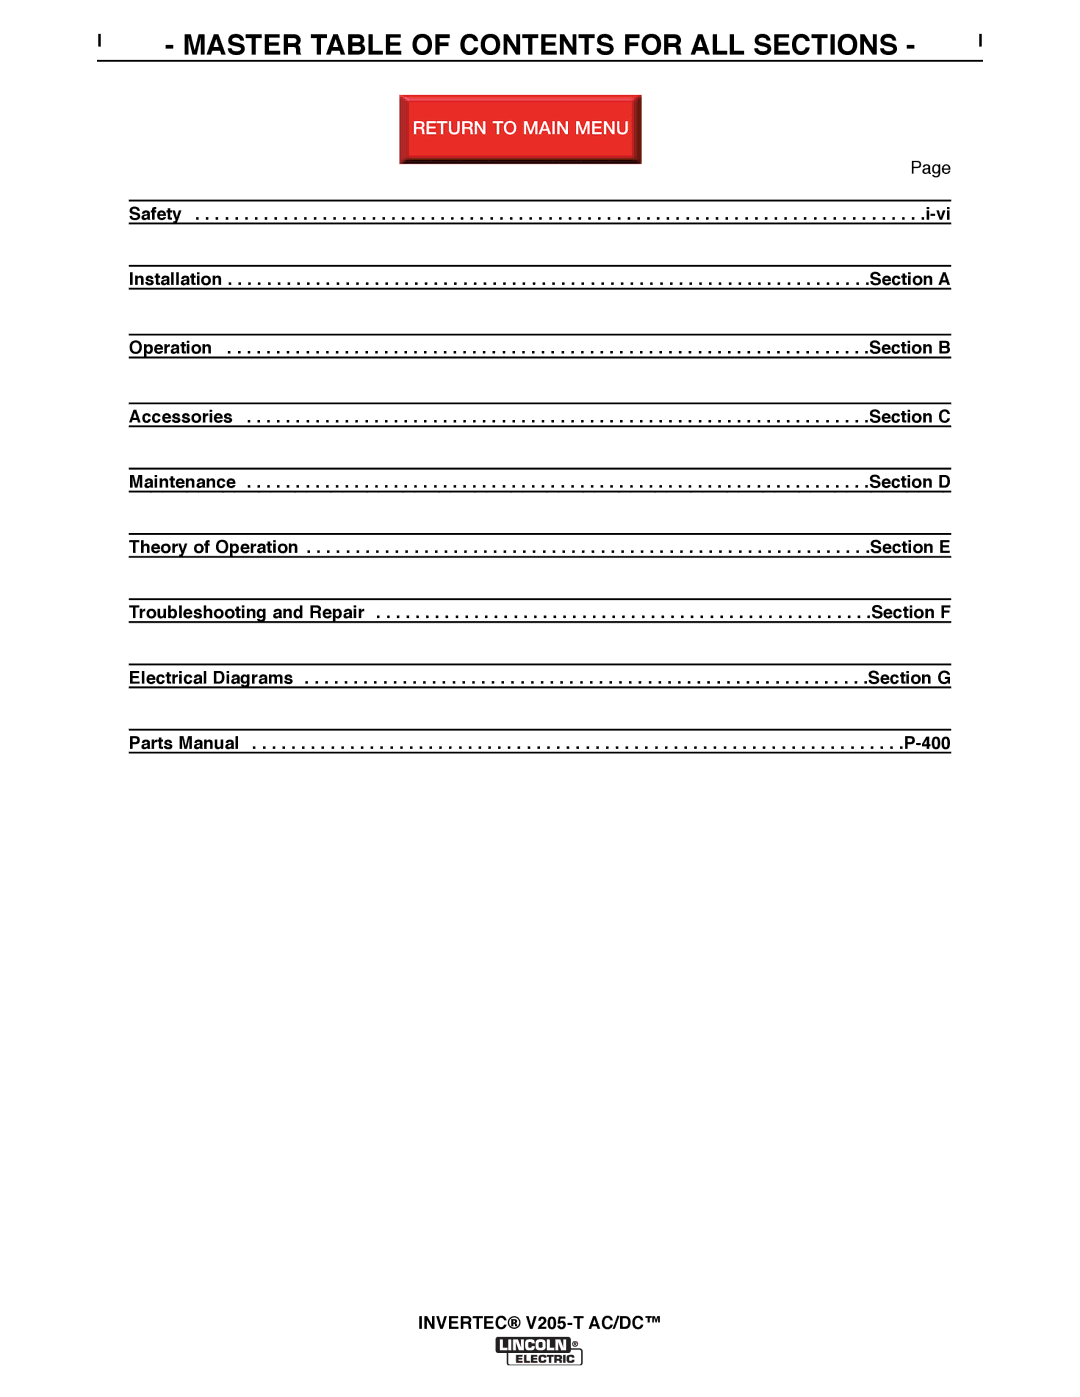 Lincoln Electric SVM161-A service manual Master Table of Contents for ALL Sections 